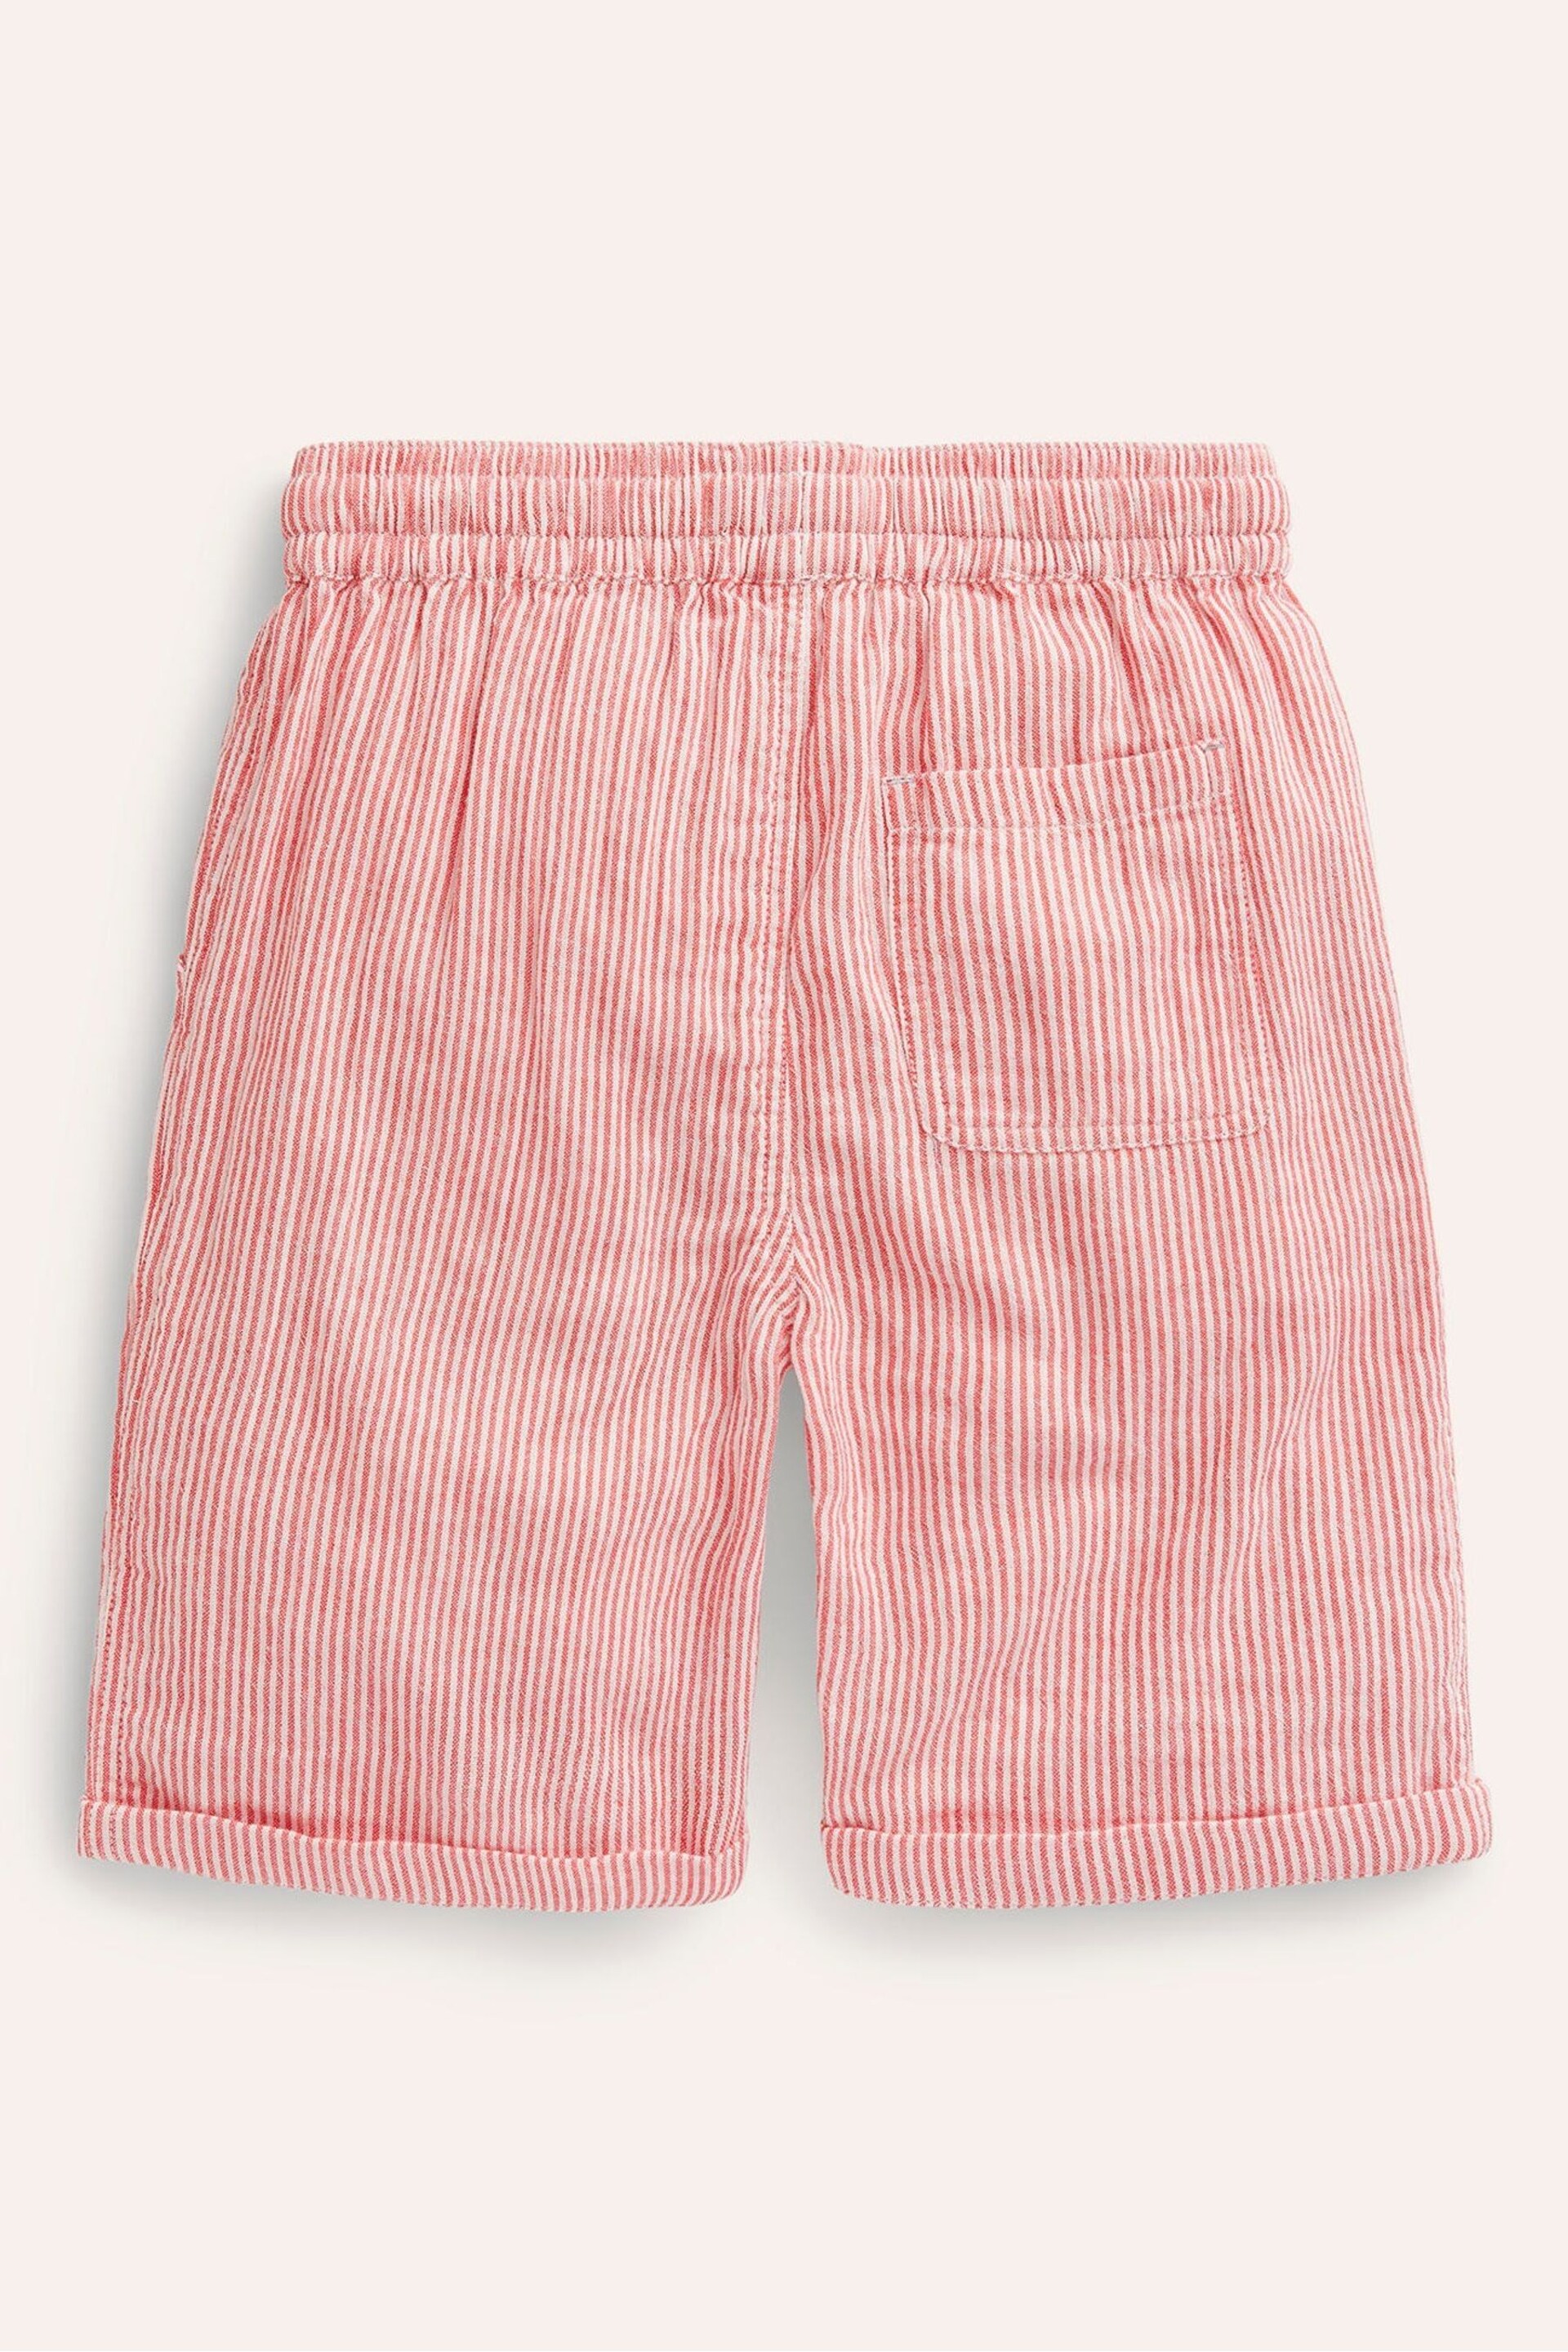 Boden Red Lightweight Holiday Shorts - Image 3 of 4